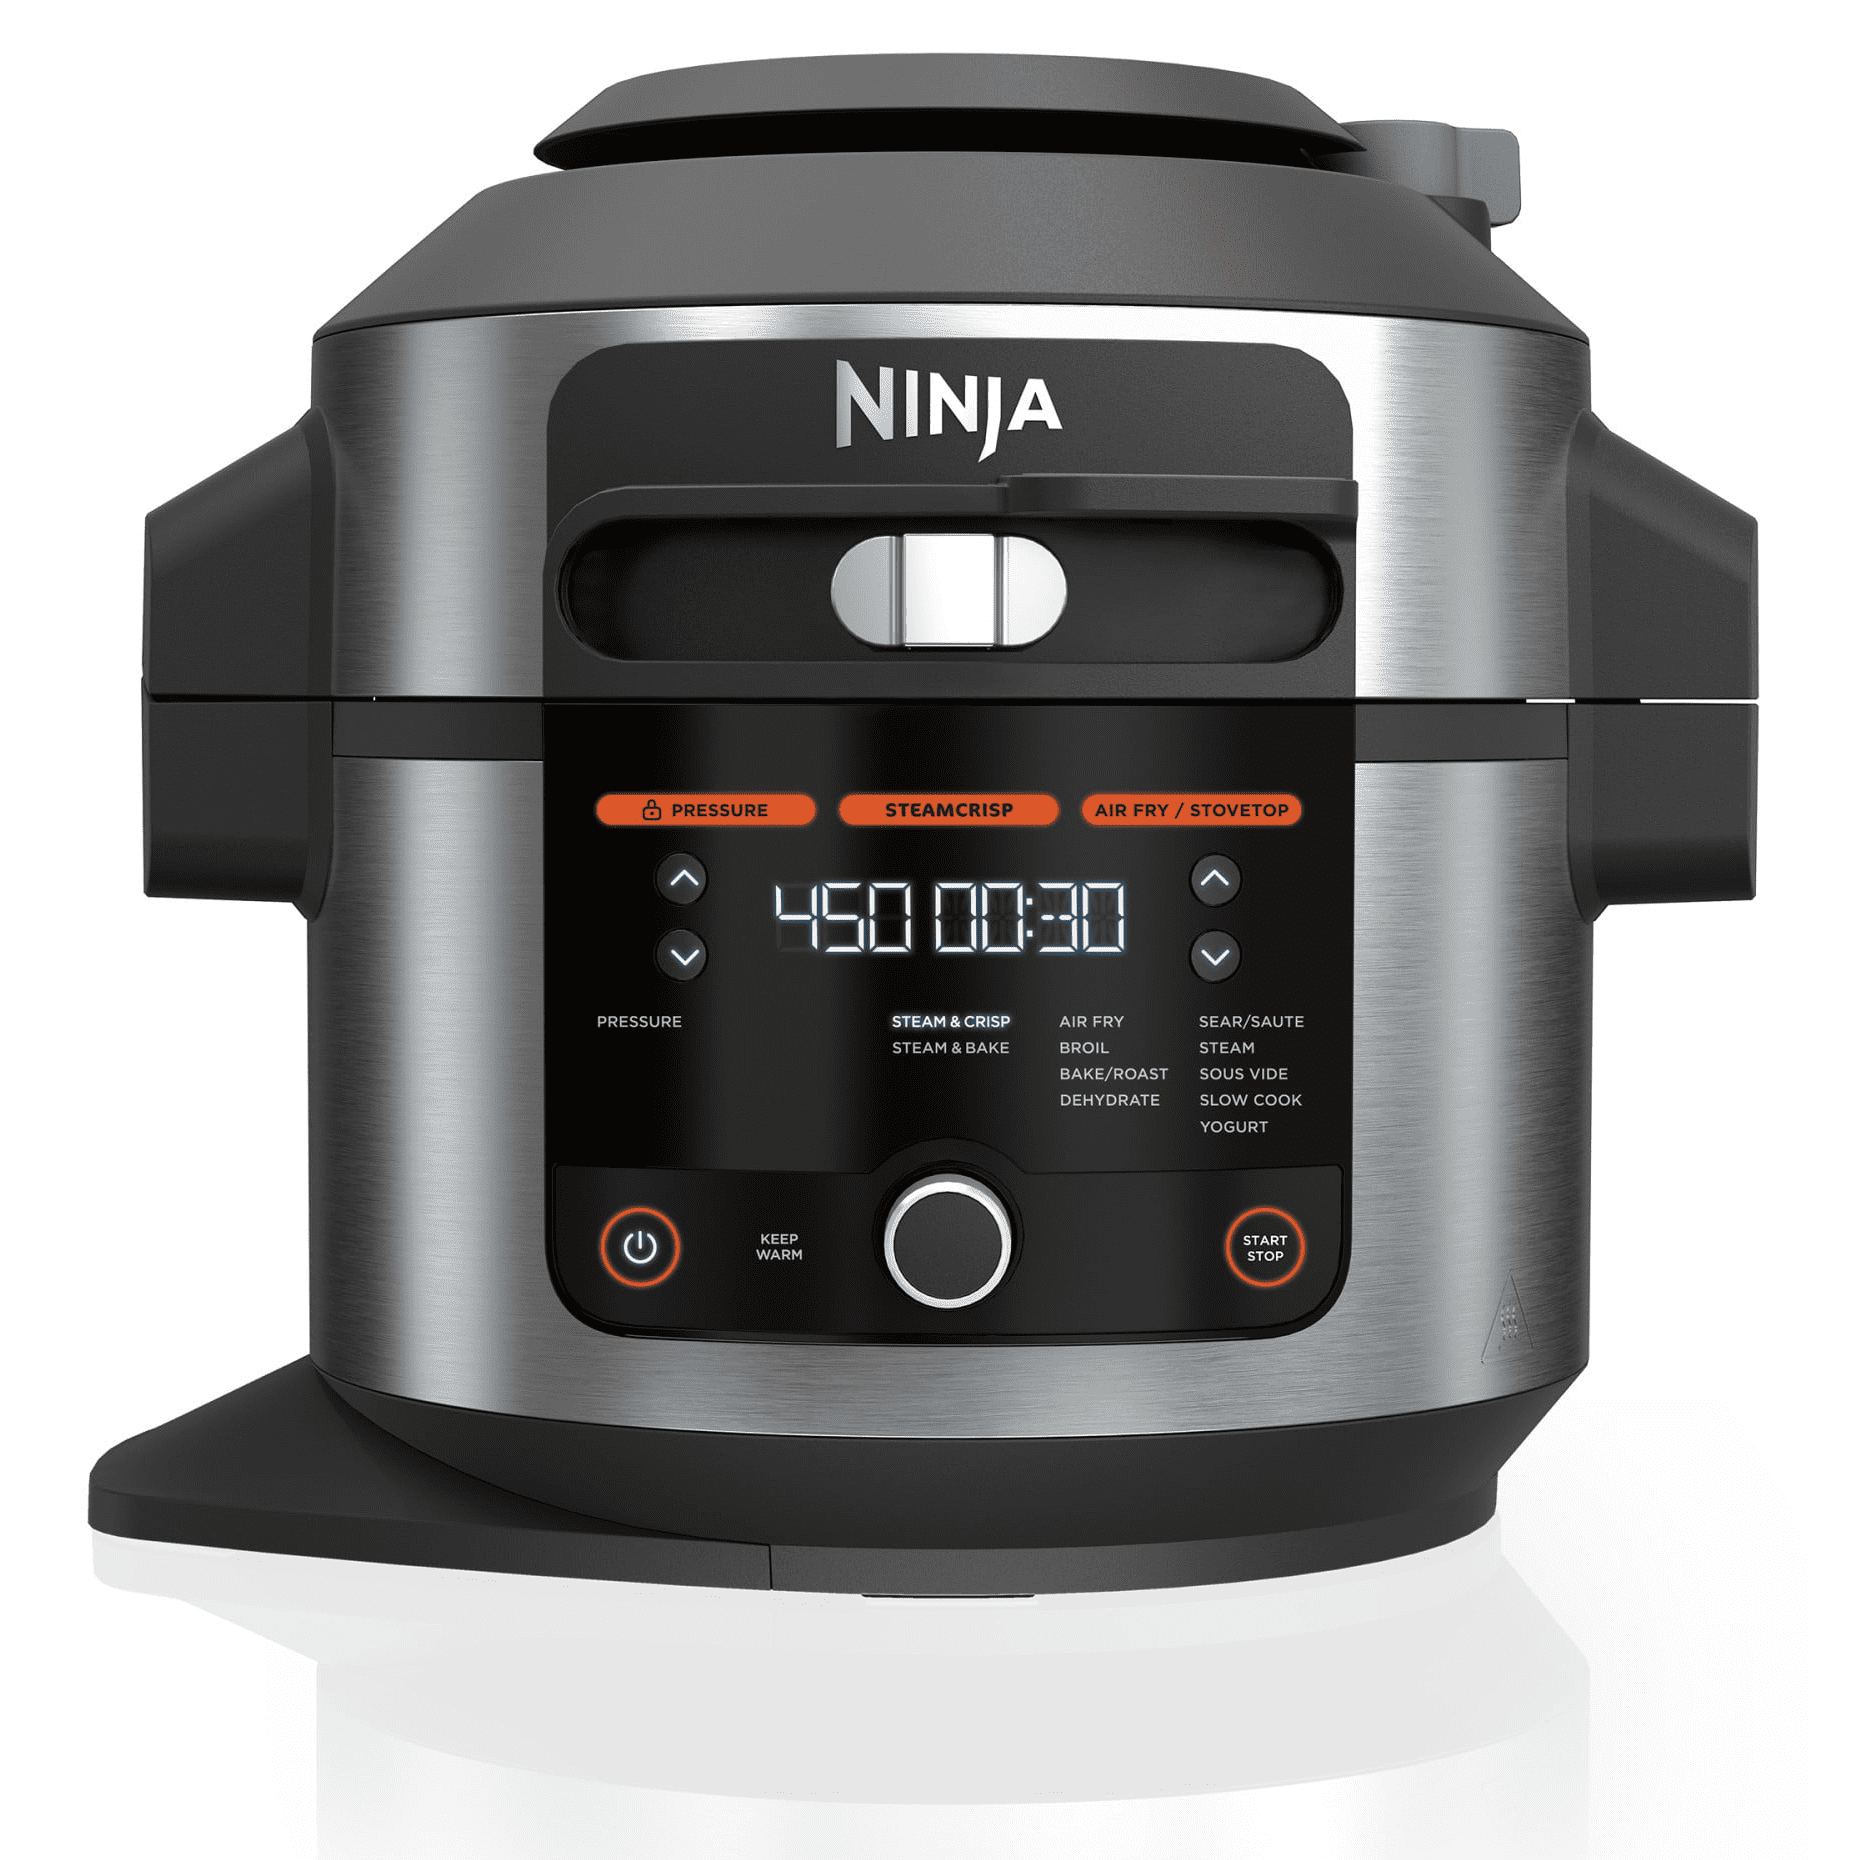 Ninja's new 14-in-1 Combi air fryer oven cooks full meals in 15 minutes,  now at $180 ($50 off)